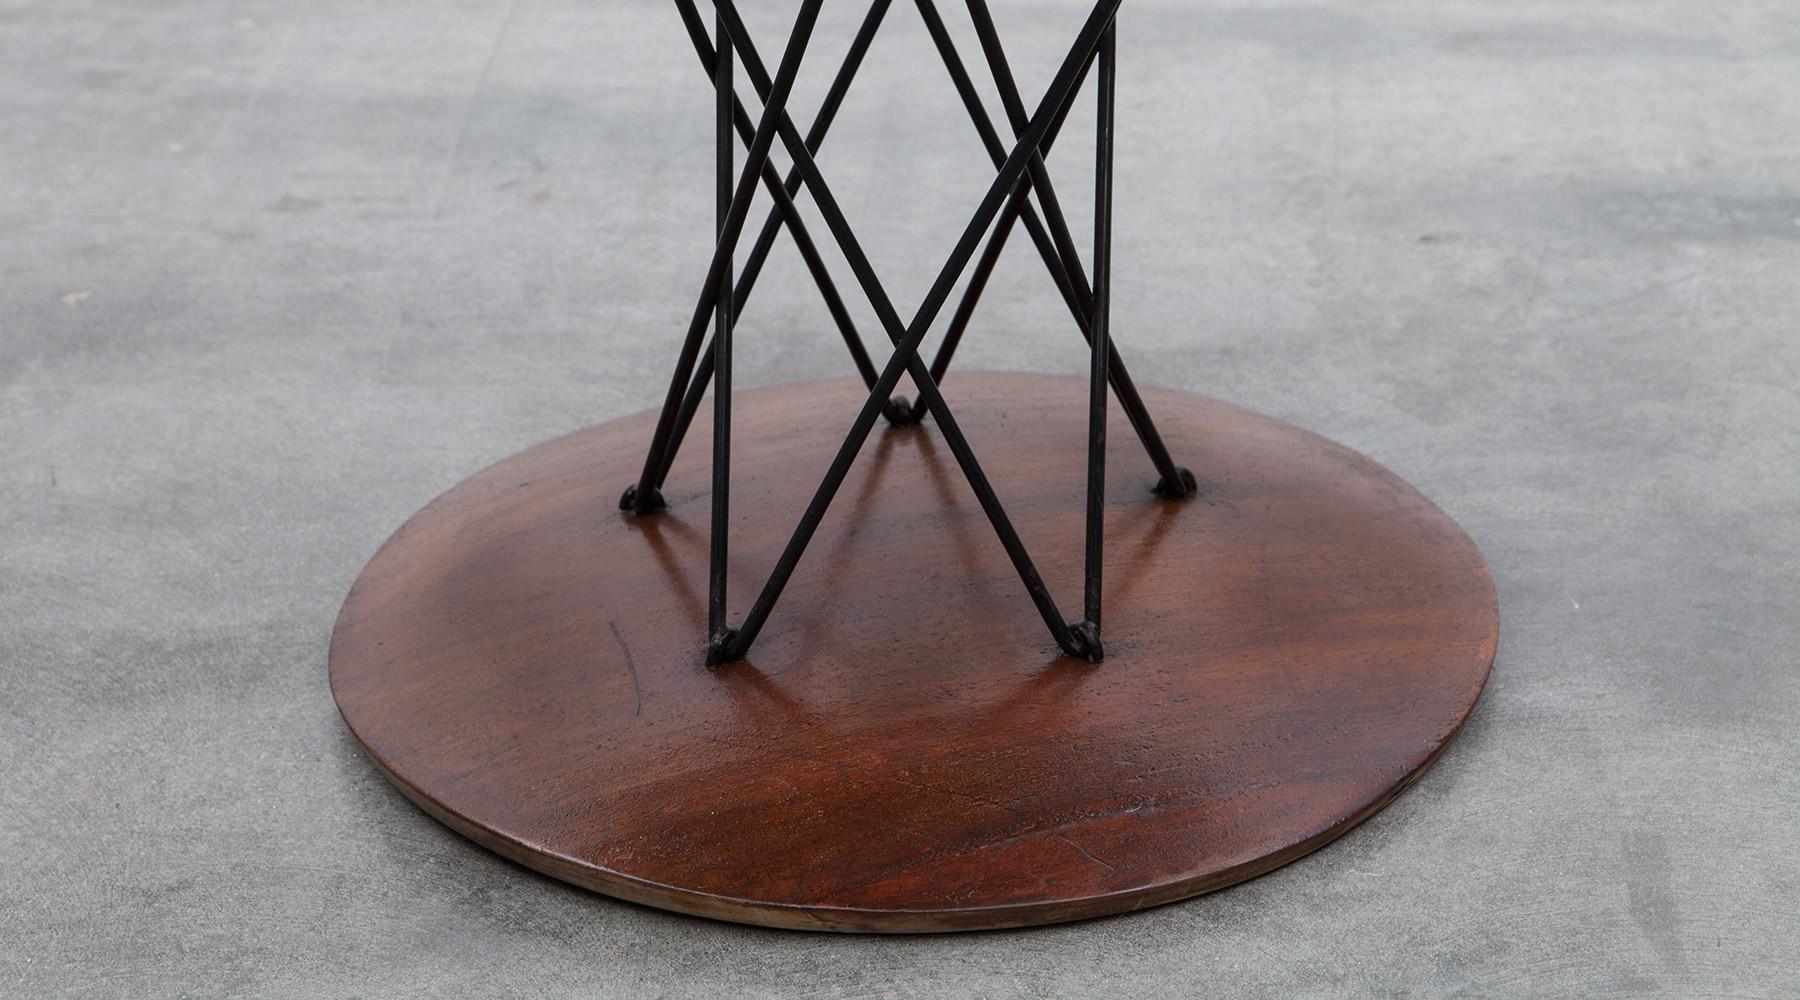 Sculptural side table by Isamu Noguchi, USA, 1954.

Beautiful side table by Isamu Noguchi. The table comes with a white laminate top with a figurative metal construction as base and ends again on a round wood top. Manufactured by Knoll